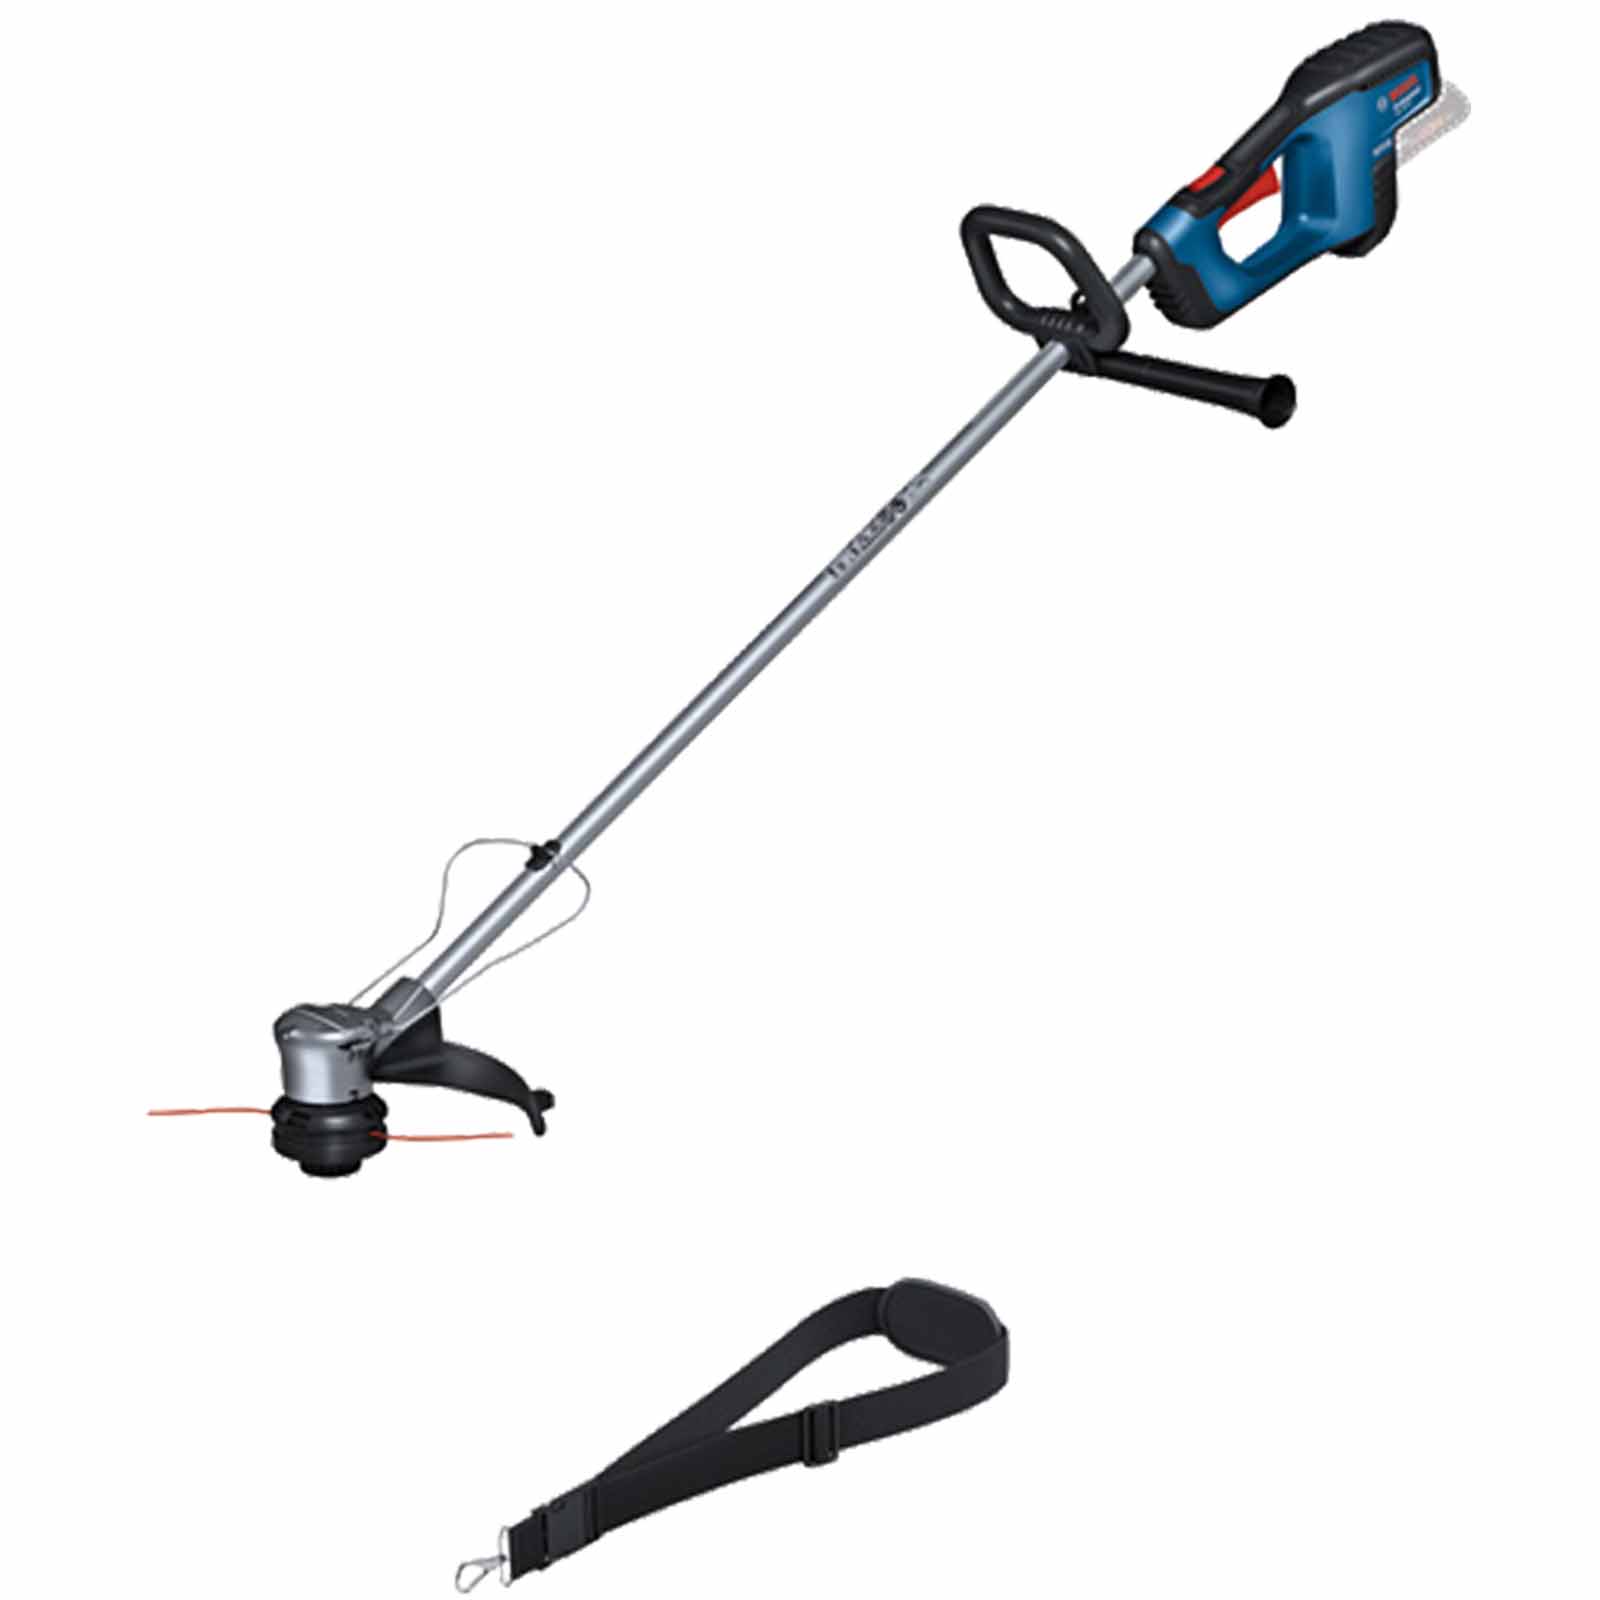 Bosch Professional GRT 18V-33 18v Cordless Brushless Grass Trimmer 330mm No Batteries No Charger